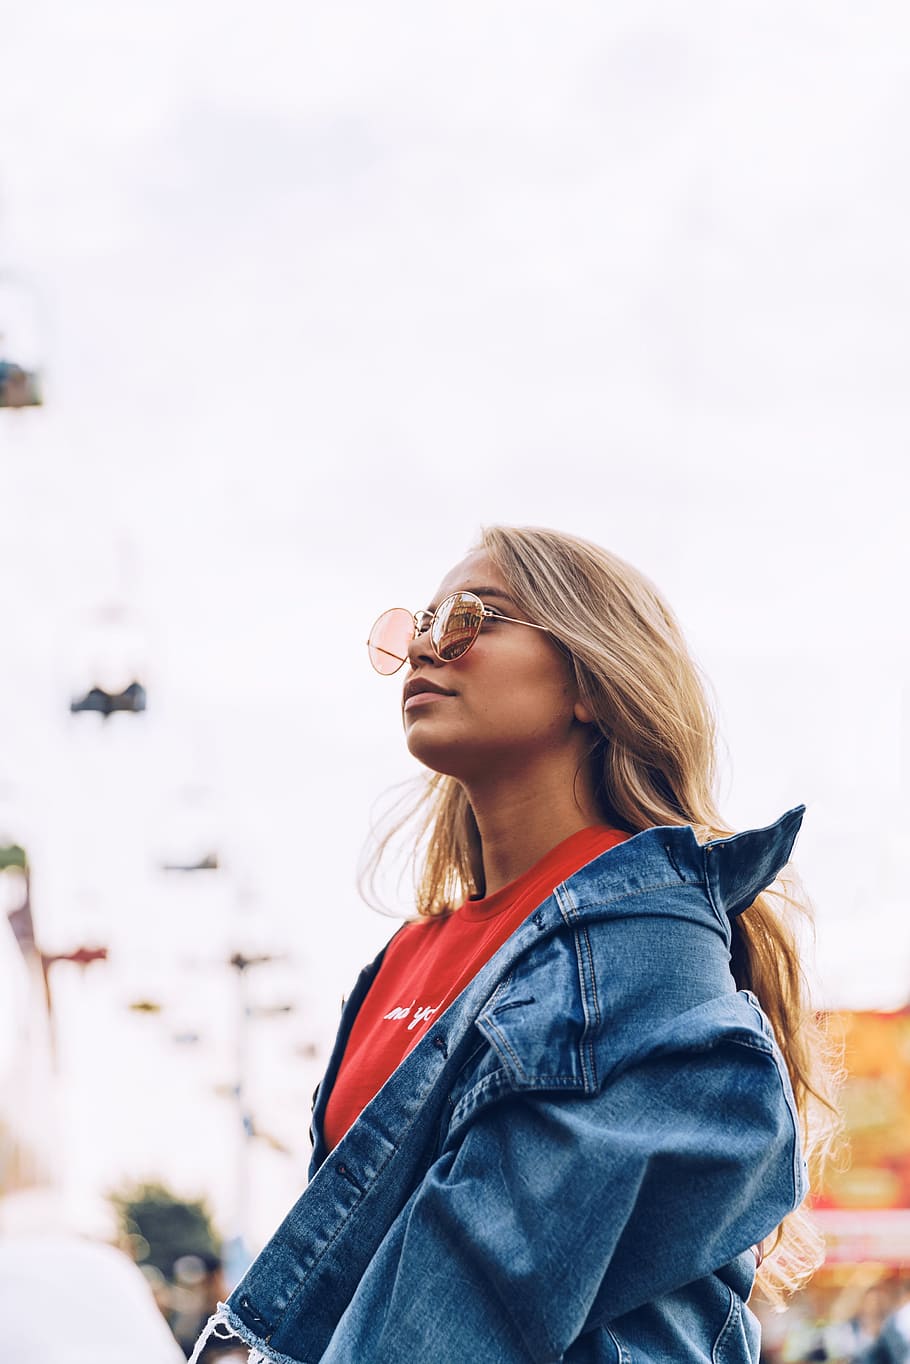 Woman In Jean Jacket Photo, Fashion, Shopify, Glasses, Hair, one person